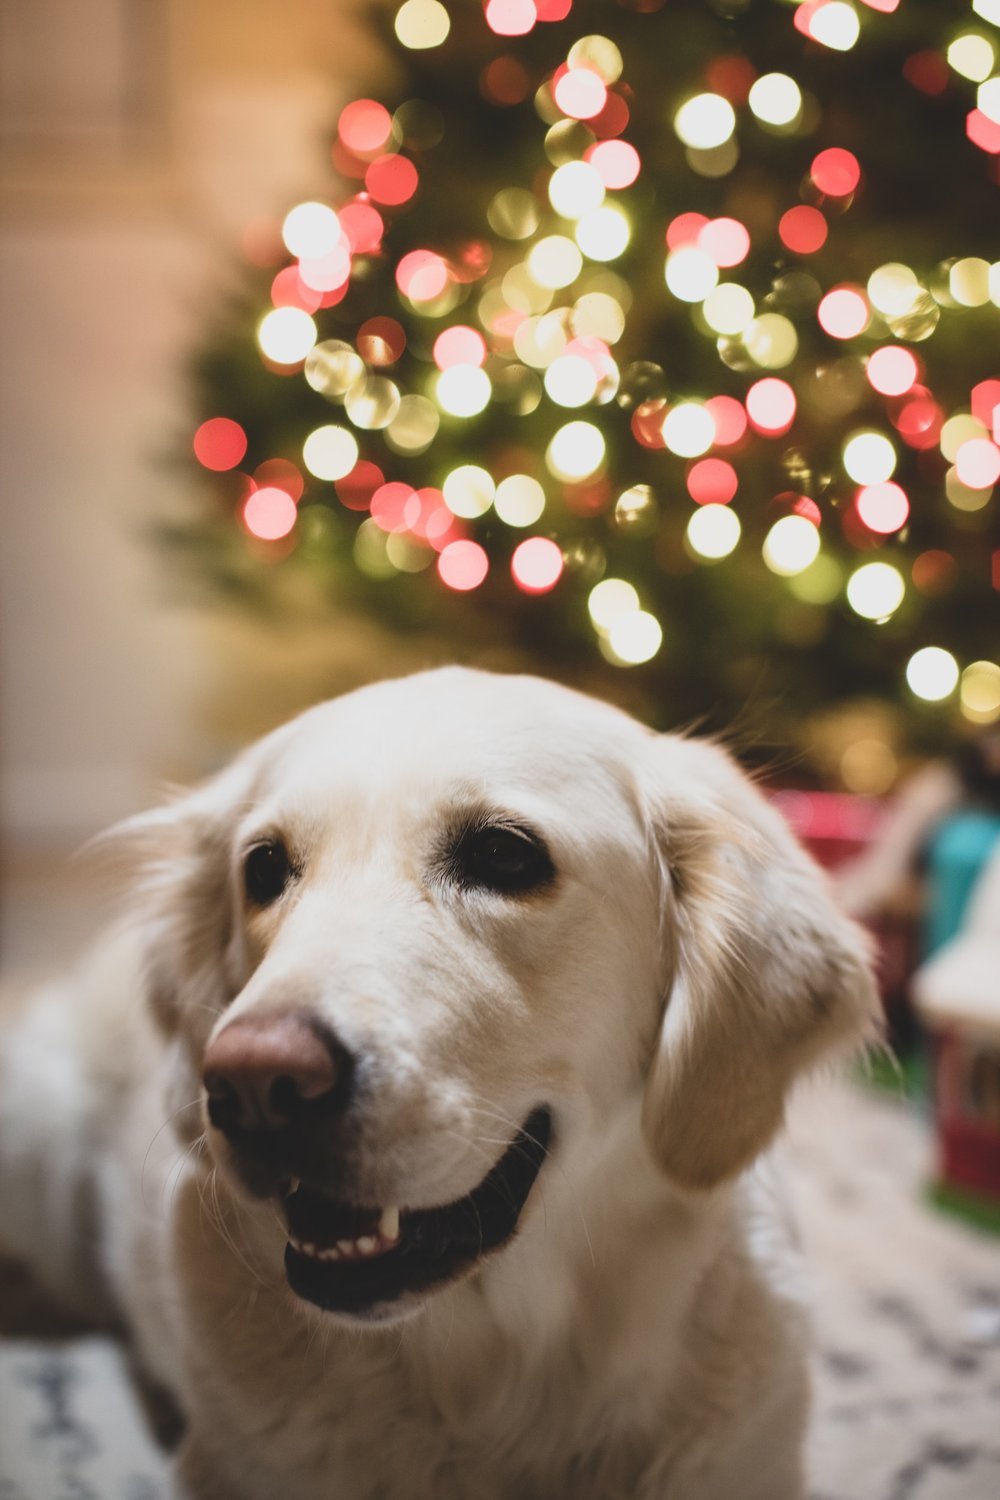 How to Keep Dogs Away from the Christmas Tree